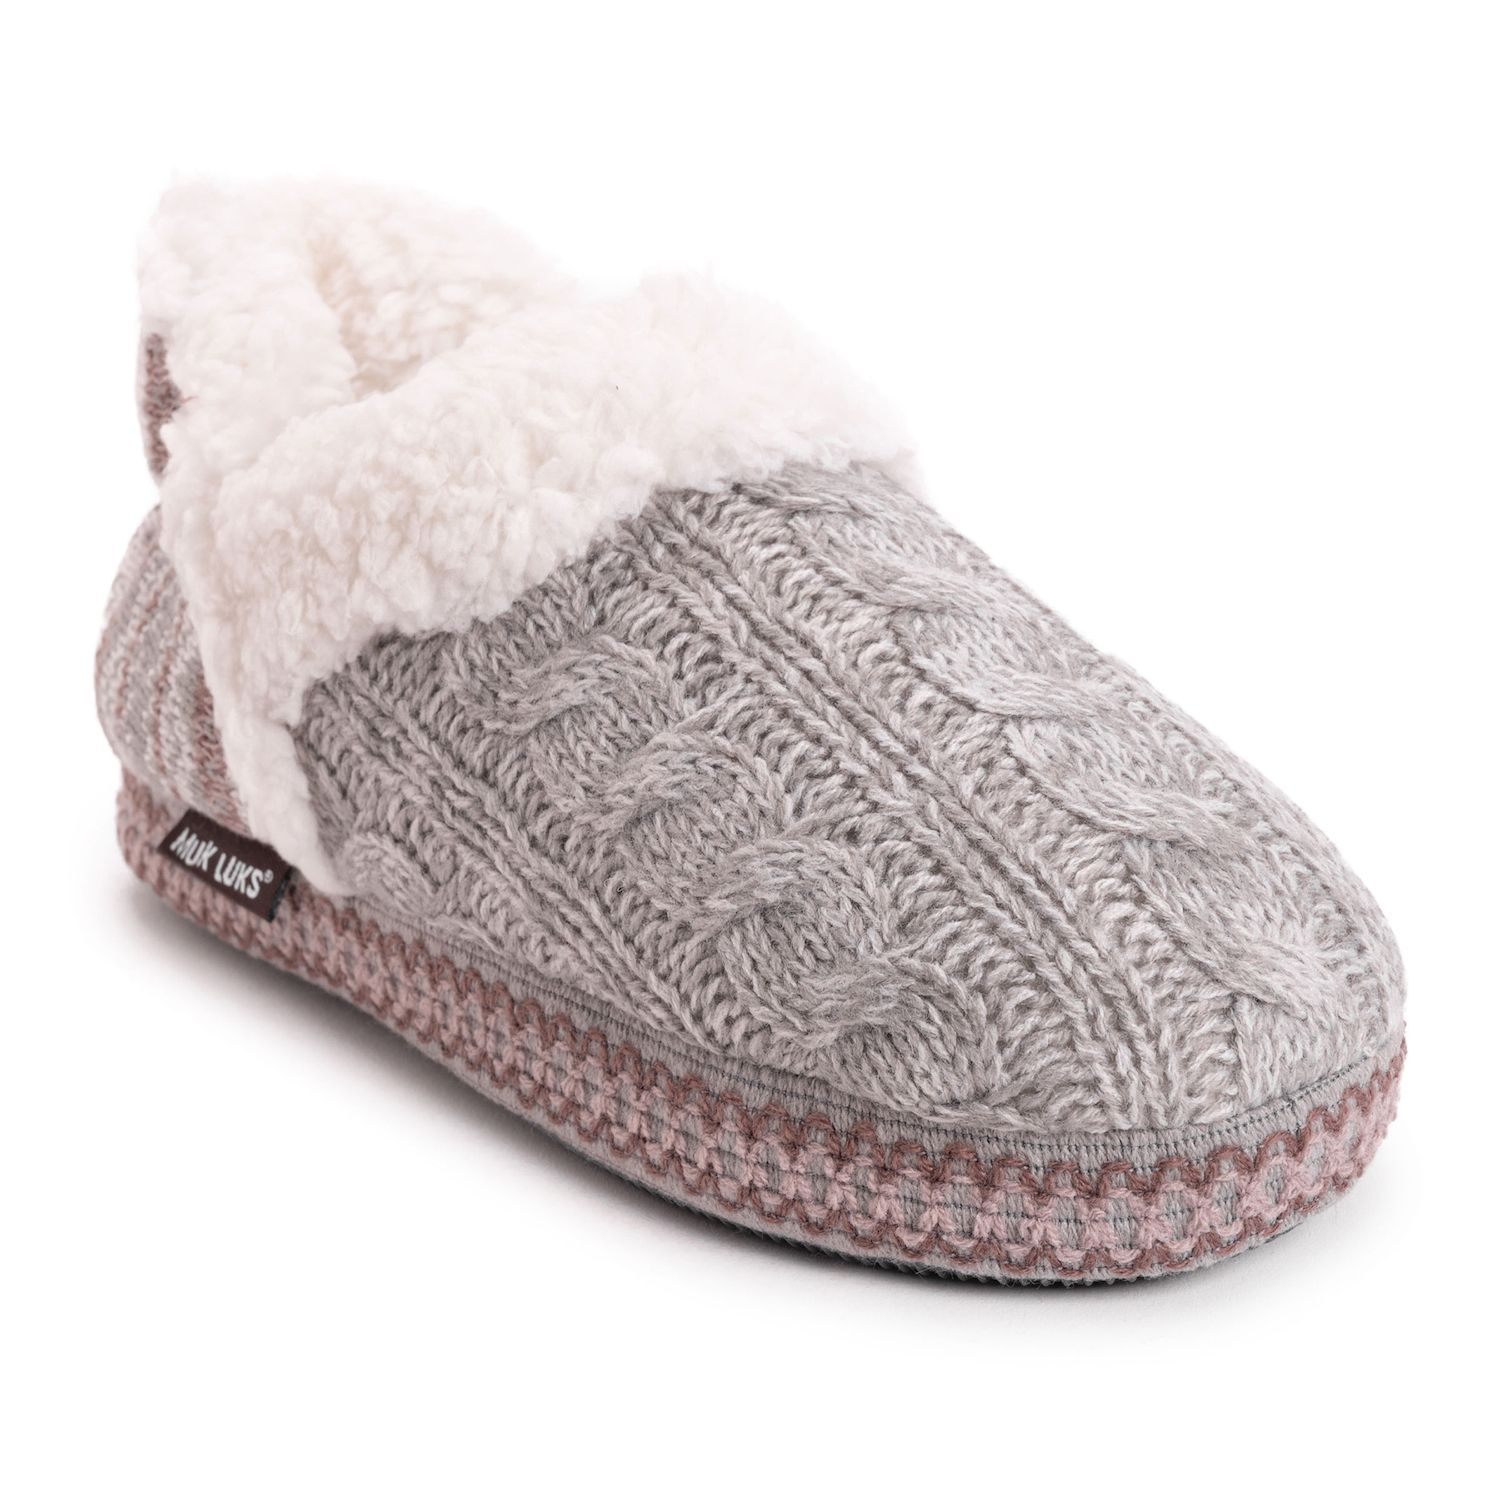 padders extra wide mens slippers